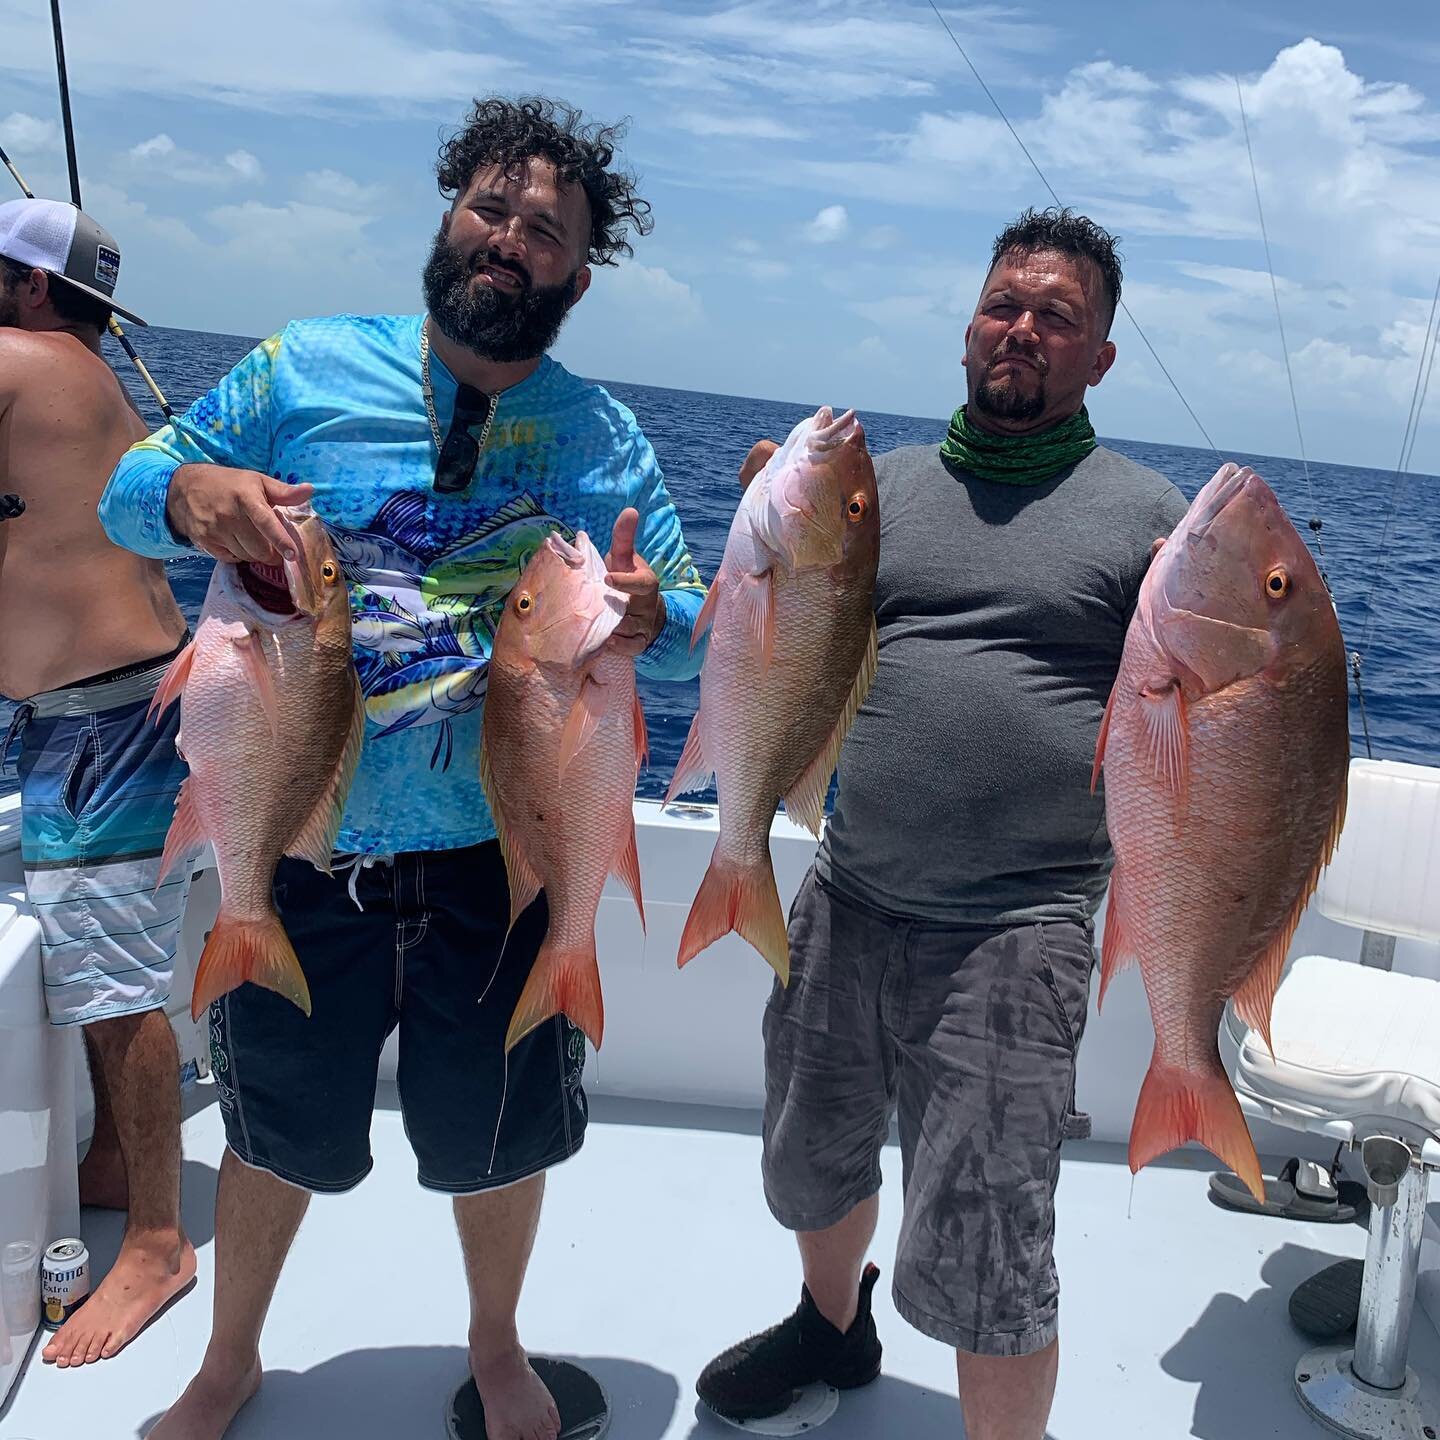 A trip from last week catching a little bit of everything, including some nice mutton snappers. 
&bull;
&bull;
&bull;#GUARANTEEDFISH &bull;
&bull;
&bull;
#Fantasticcharters #tuna #mutton #yellowtail #trigger #kingfish #mahi #offshore #keylargo #flkey